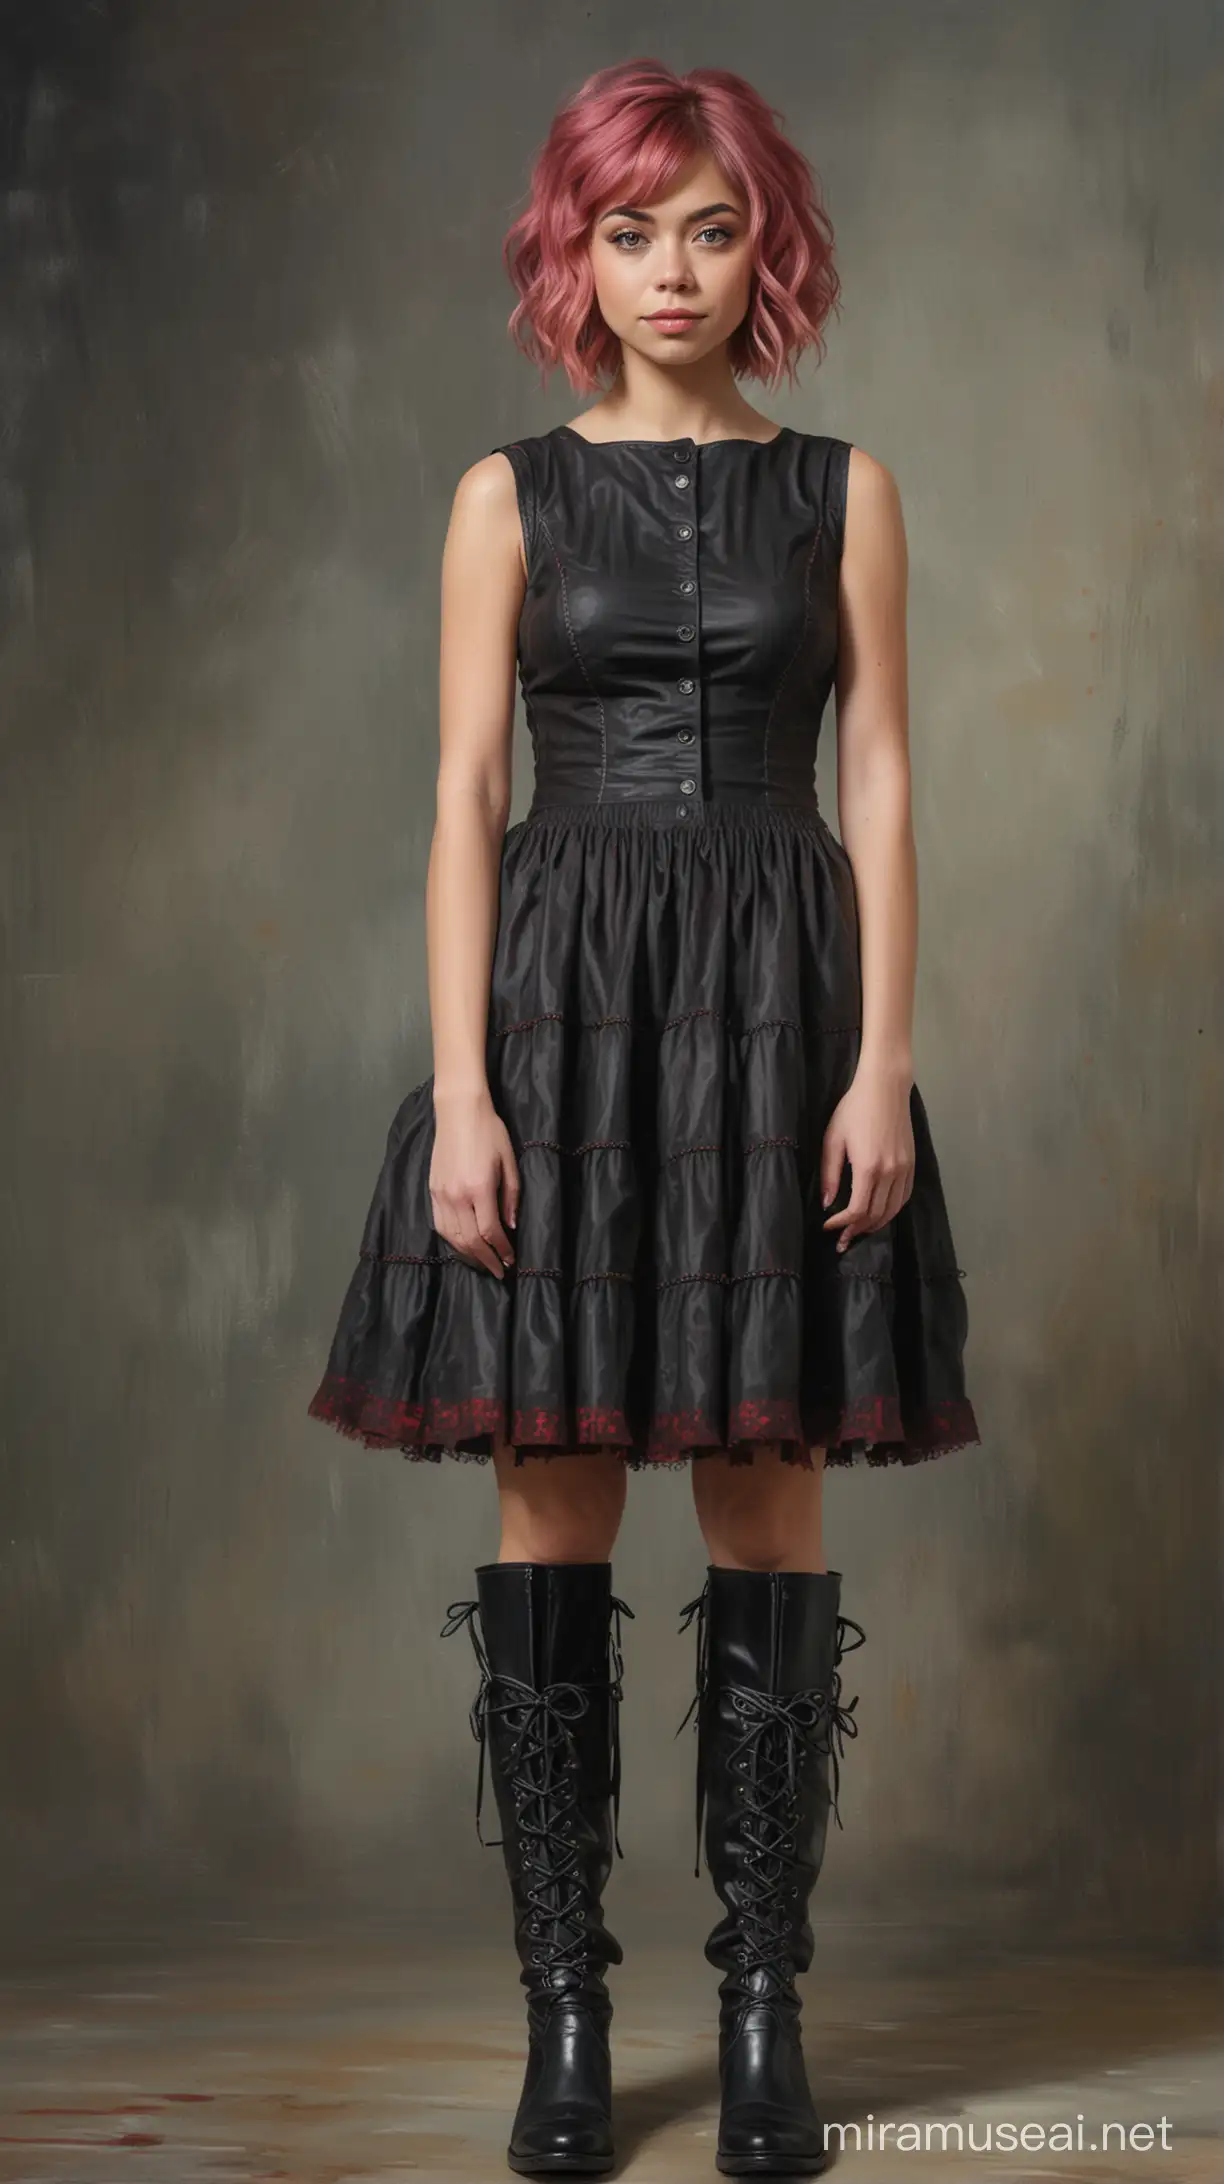 classical oil impressionist Painting of a young ((Sarah Hyland:1.7)), with pink hair with a bob and bangs wearing a short black and red gothic style dress and black boots, full body